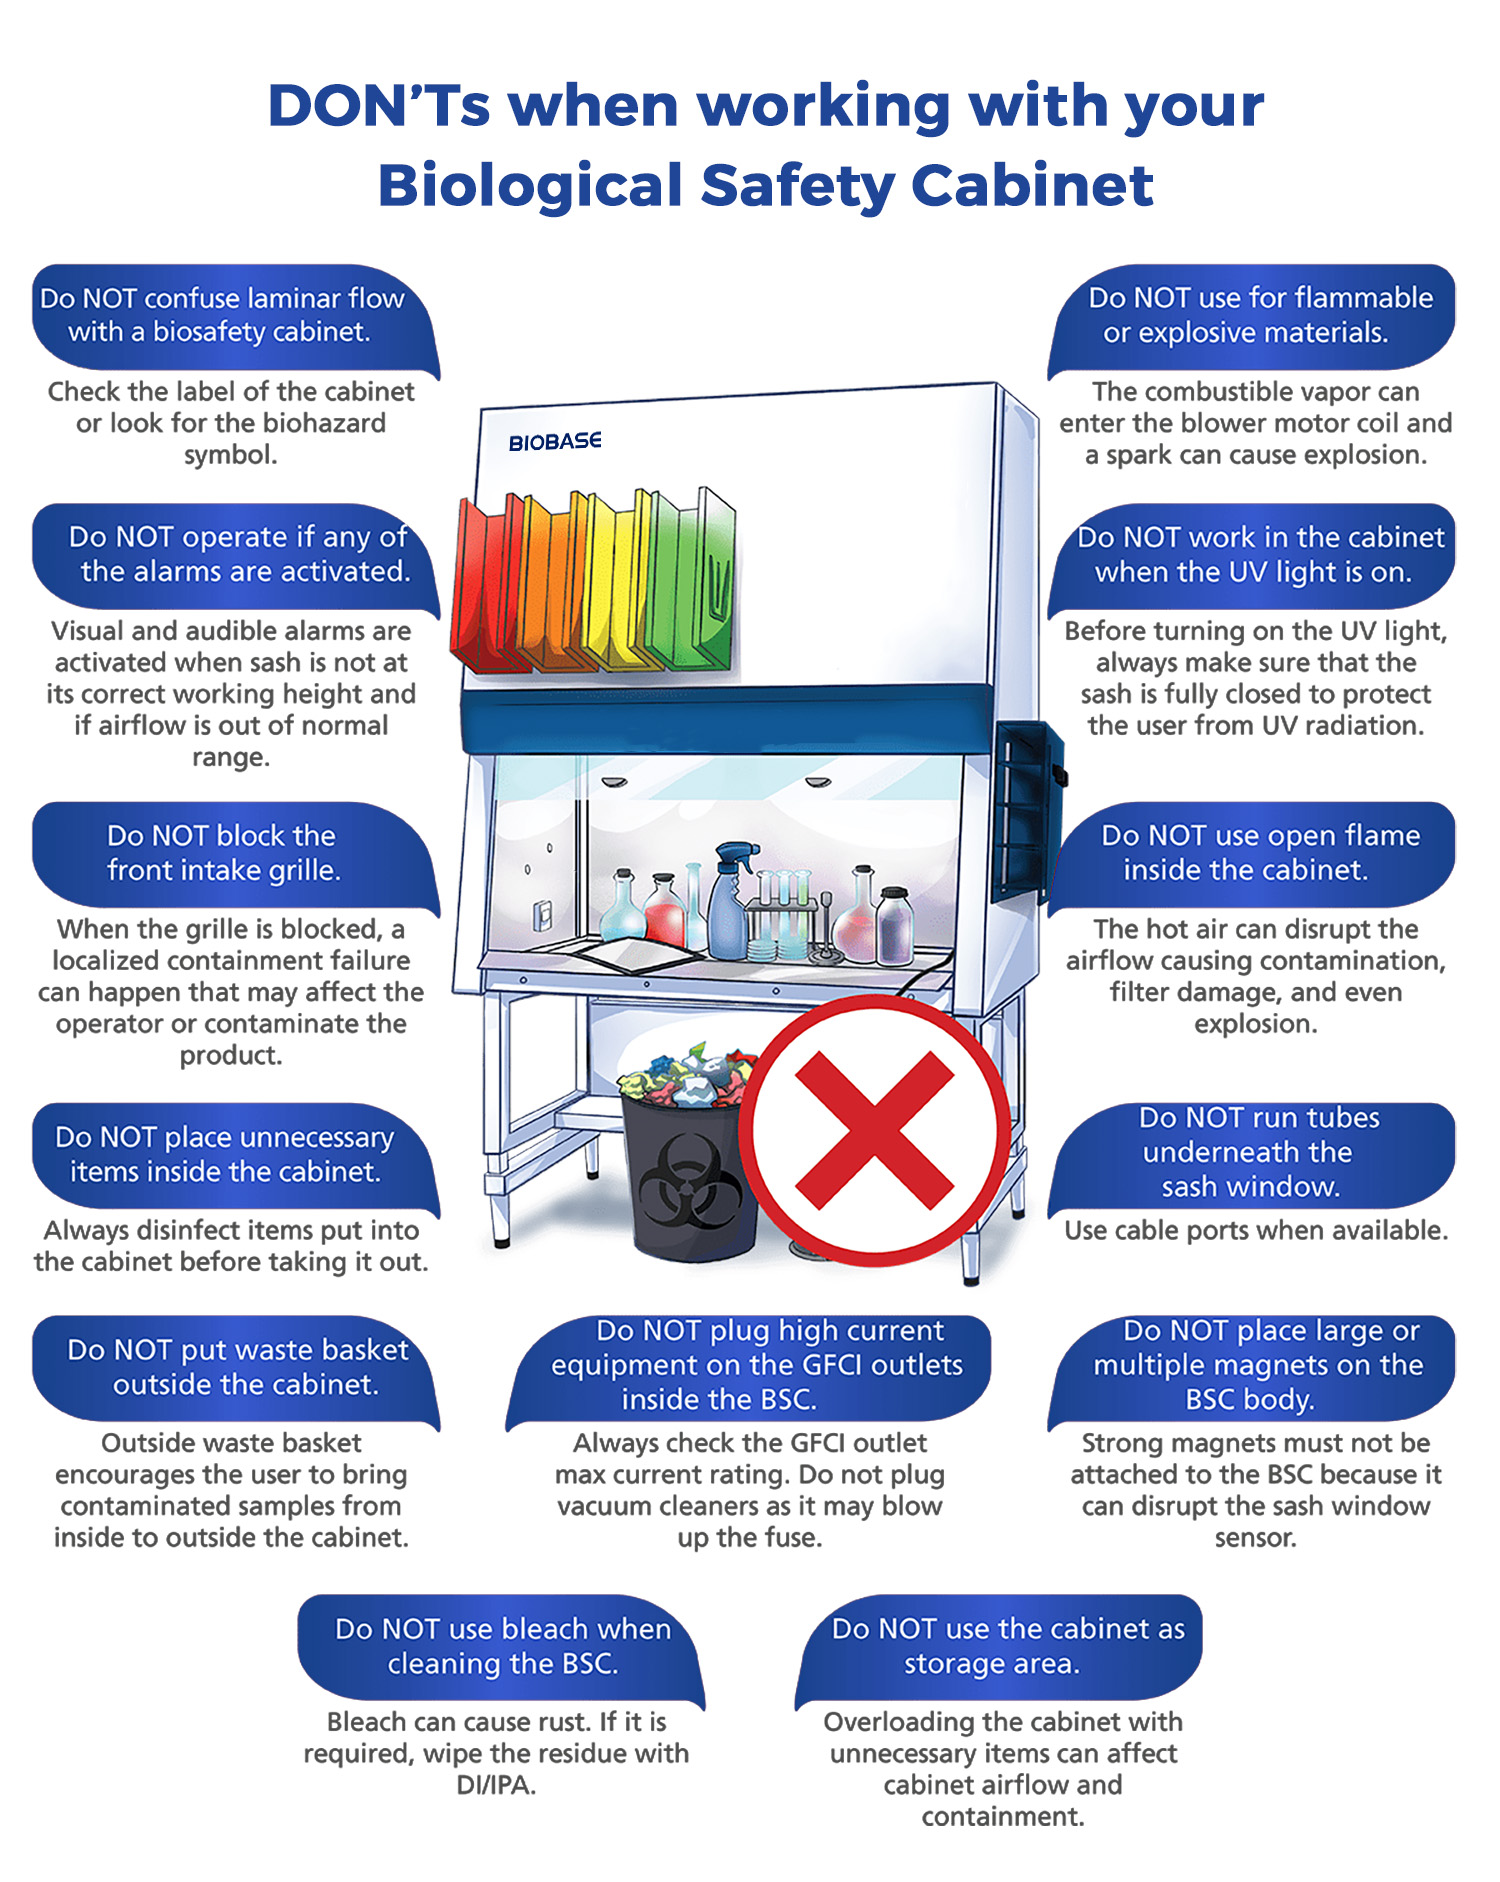 How to use biological safety cabinets correctly